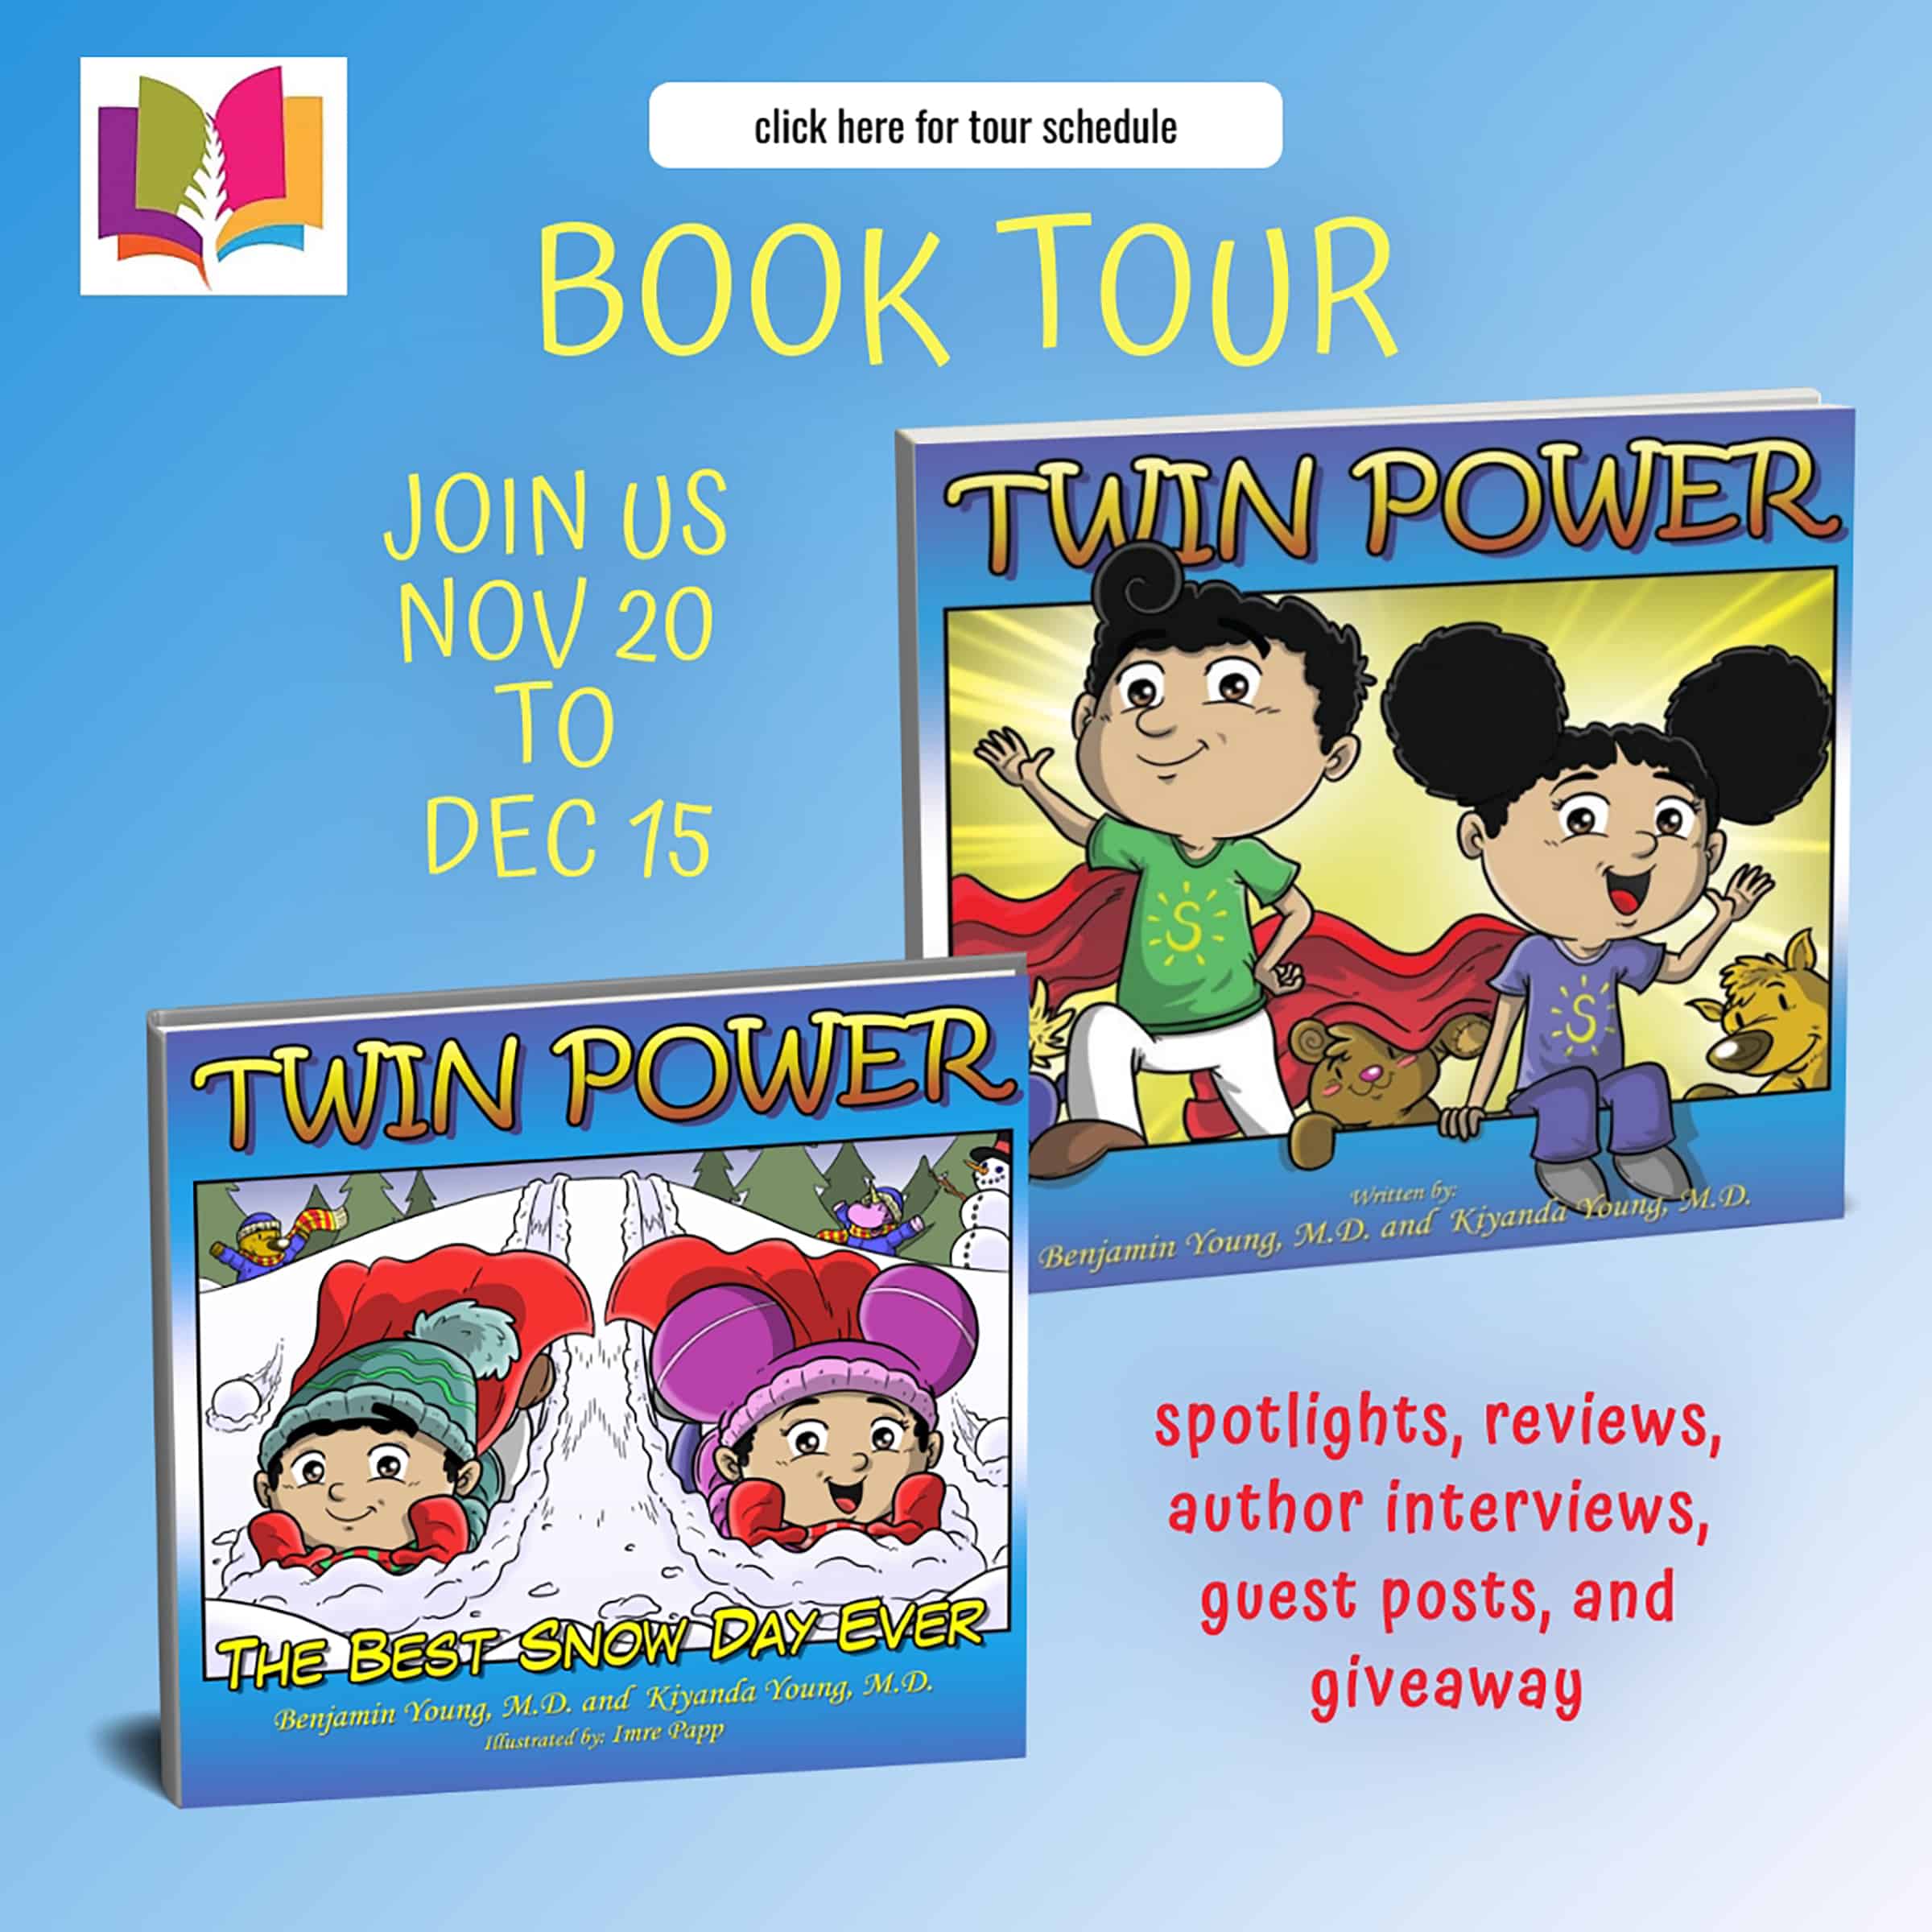 Twin Power: Best Snow Day Ever (Twin Power #2) by Ben and Kiyanda Young | Children's Book Review ~ Giveaway | #Family #Twins @iReadBookTours @TwinPowerBooks @BeesTwizzler